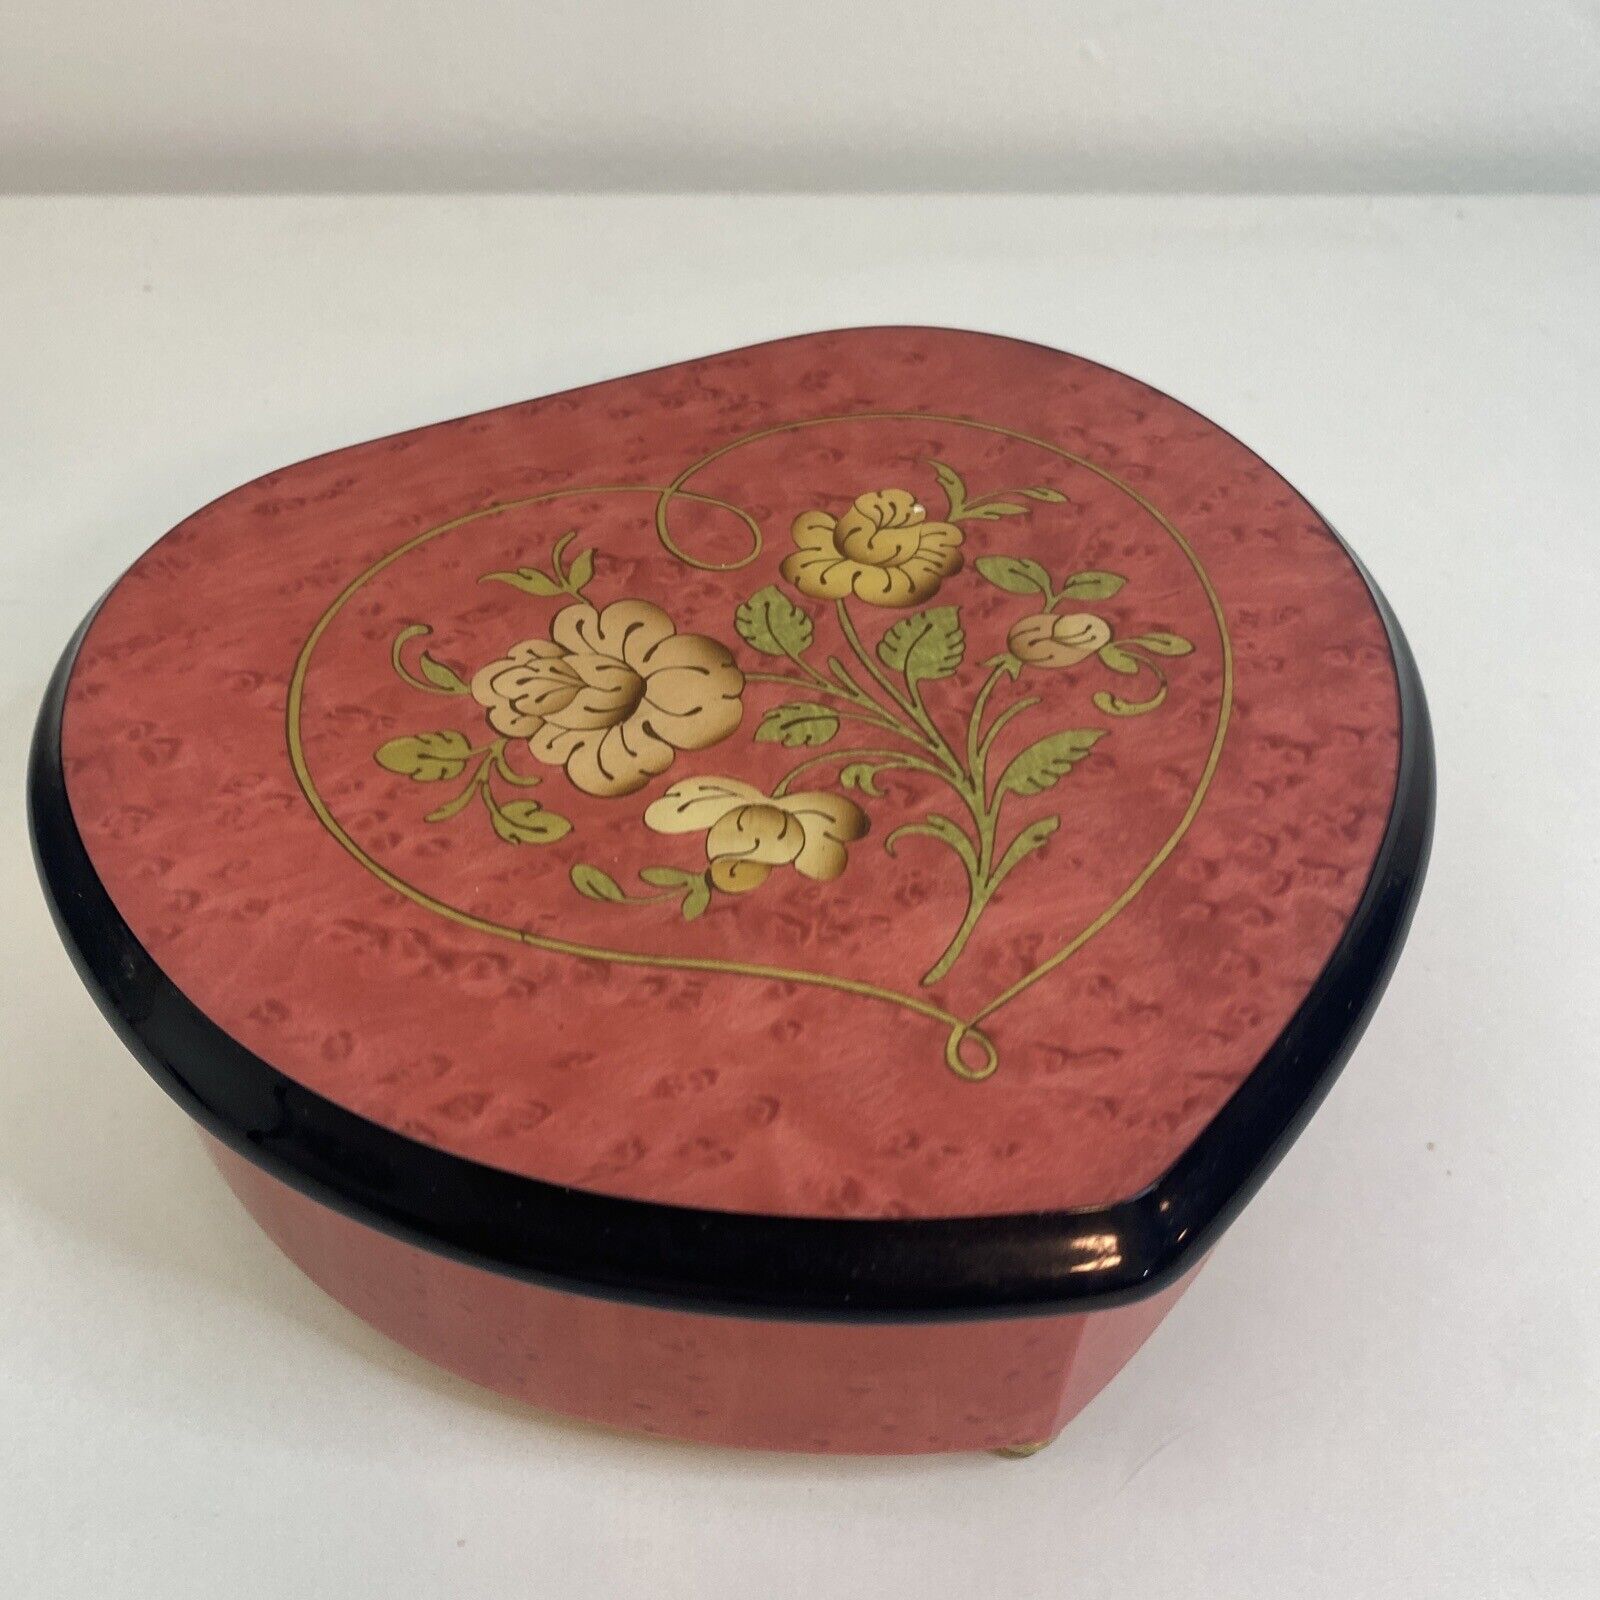 Vintage Reuge Music Jewelry Box Heart Shape “ My Heart Will Go On”